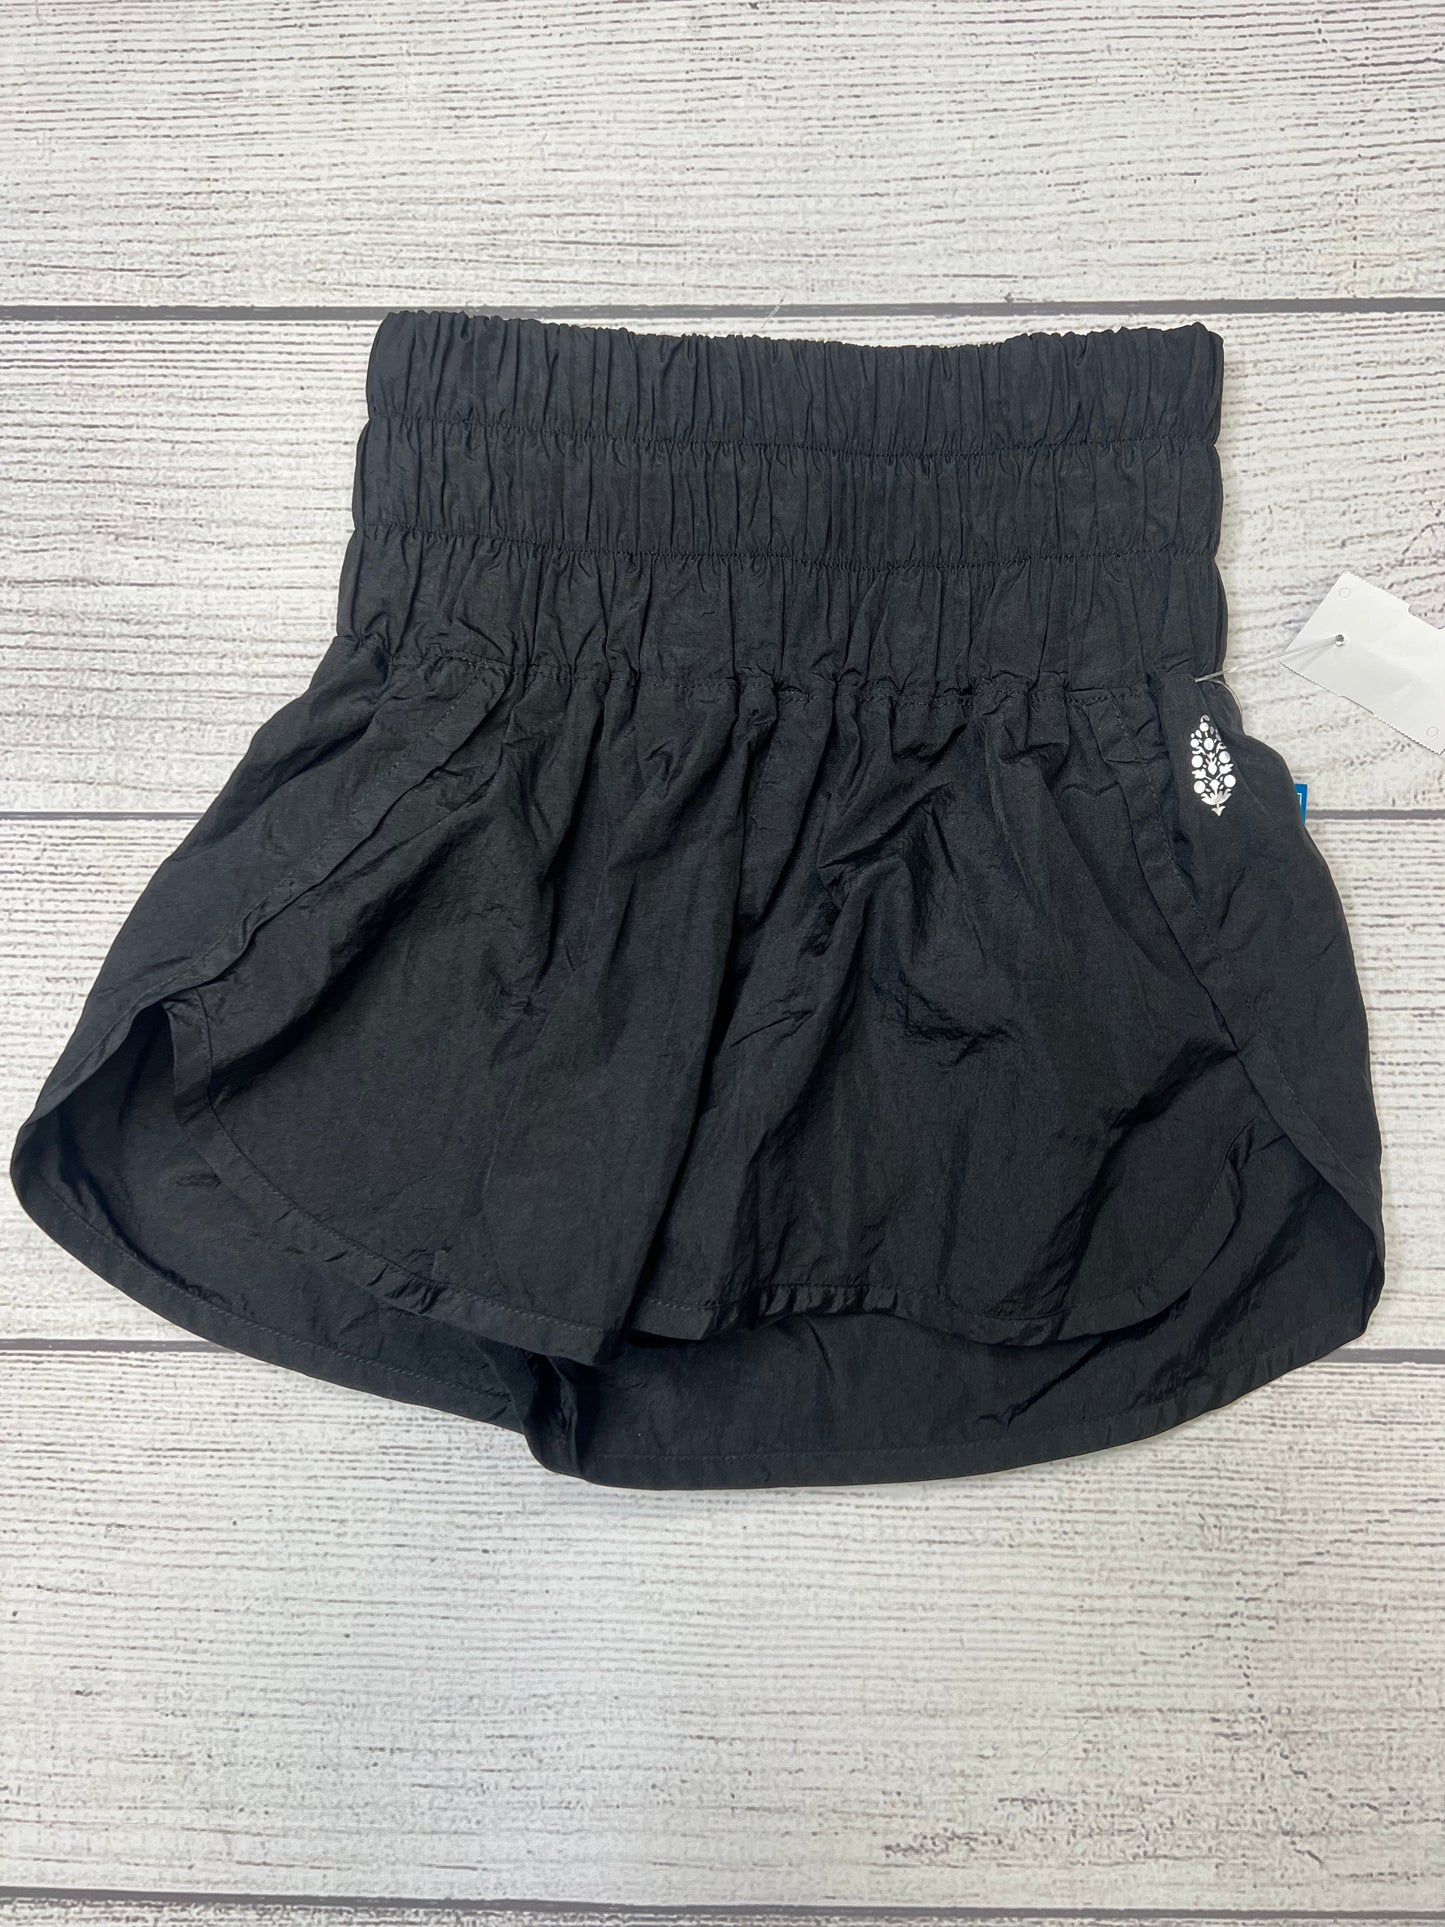 Athletic Shorts By Free People  Size: Xs